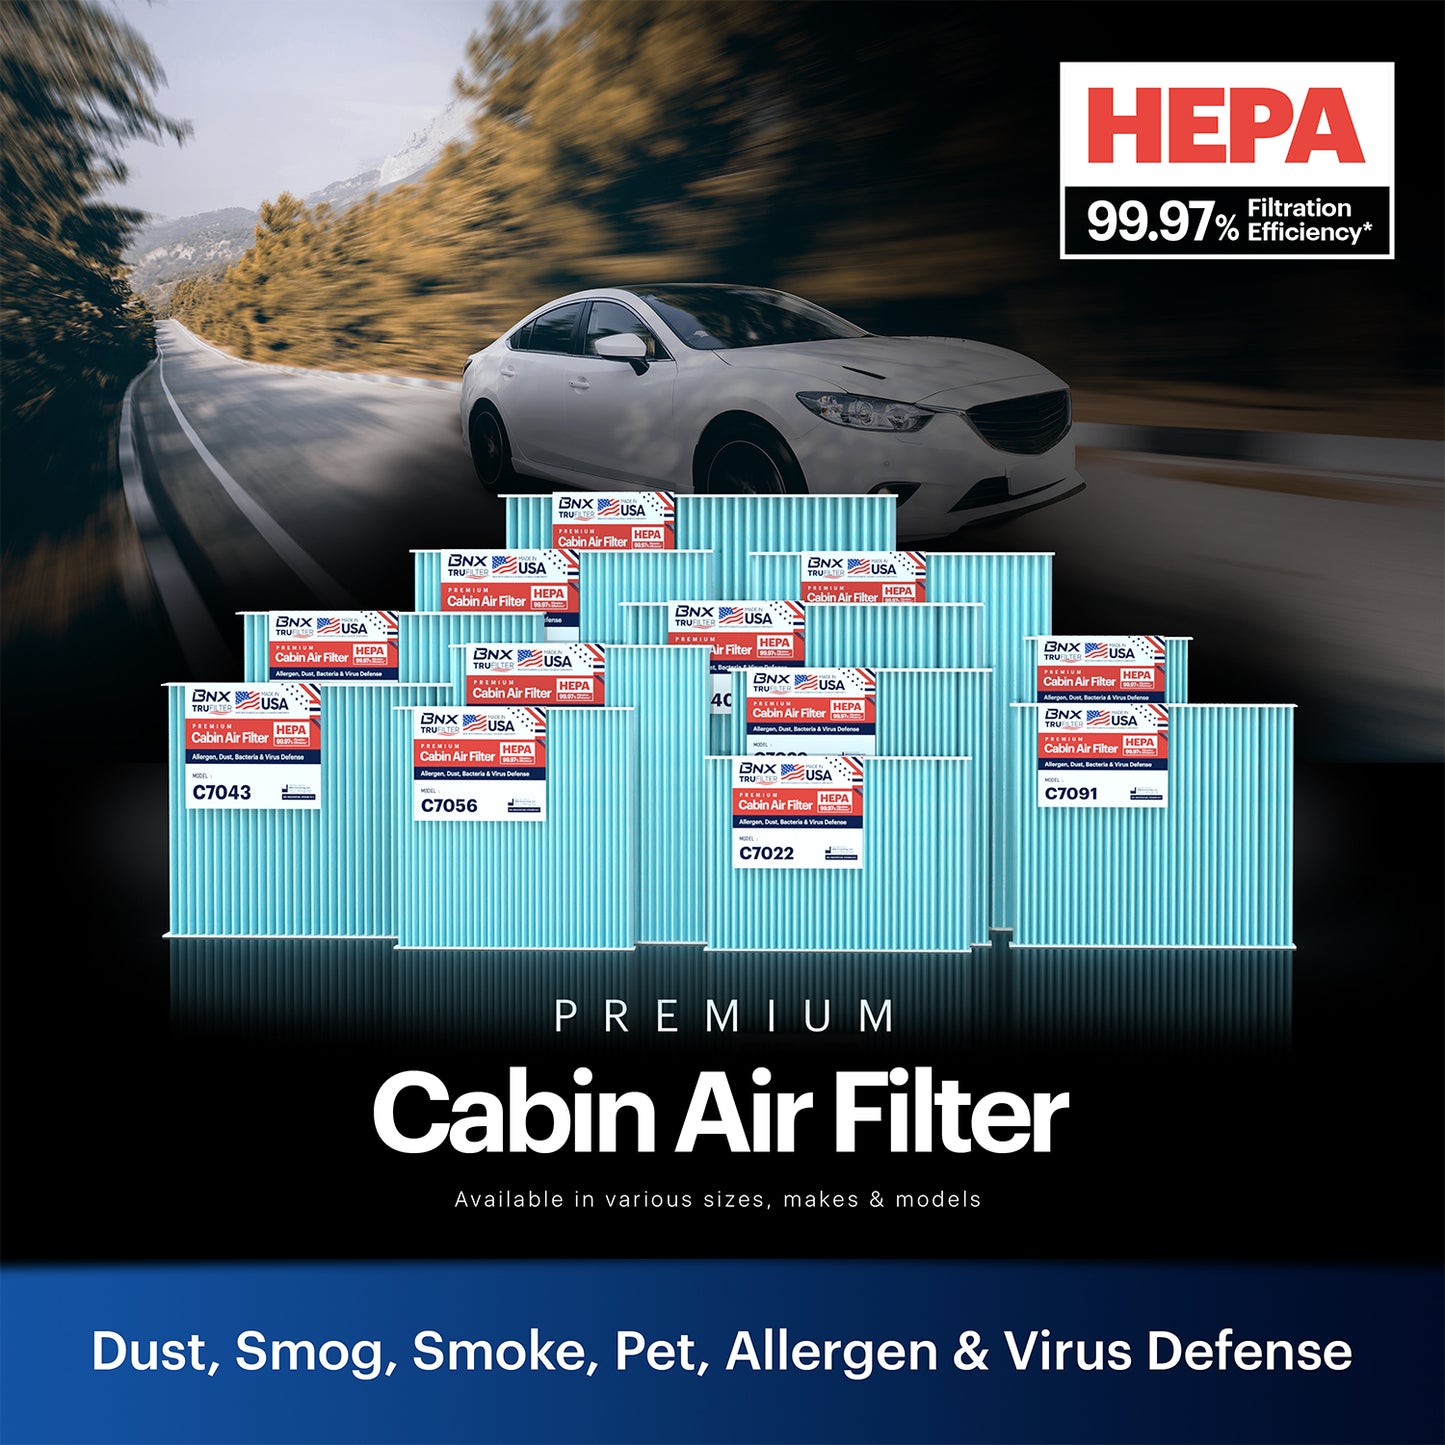 BNX TruFilter C7087 Cabin Air Filter, HEPA 99.97%, MADE IN USA, Compatible With Toyota: Camry, Avalon; Lexus: ES300h, ES350, RX350, RX450h